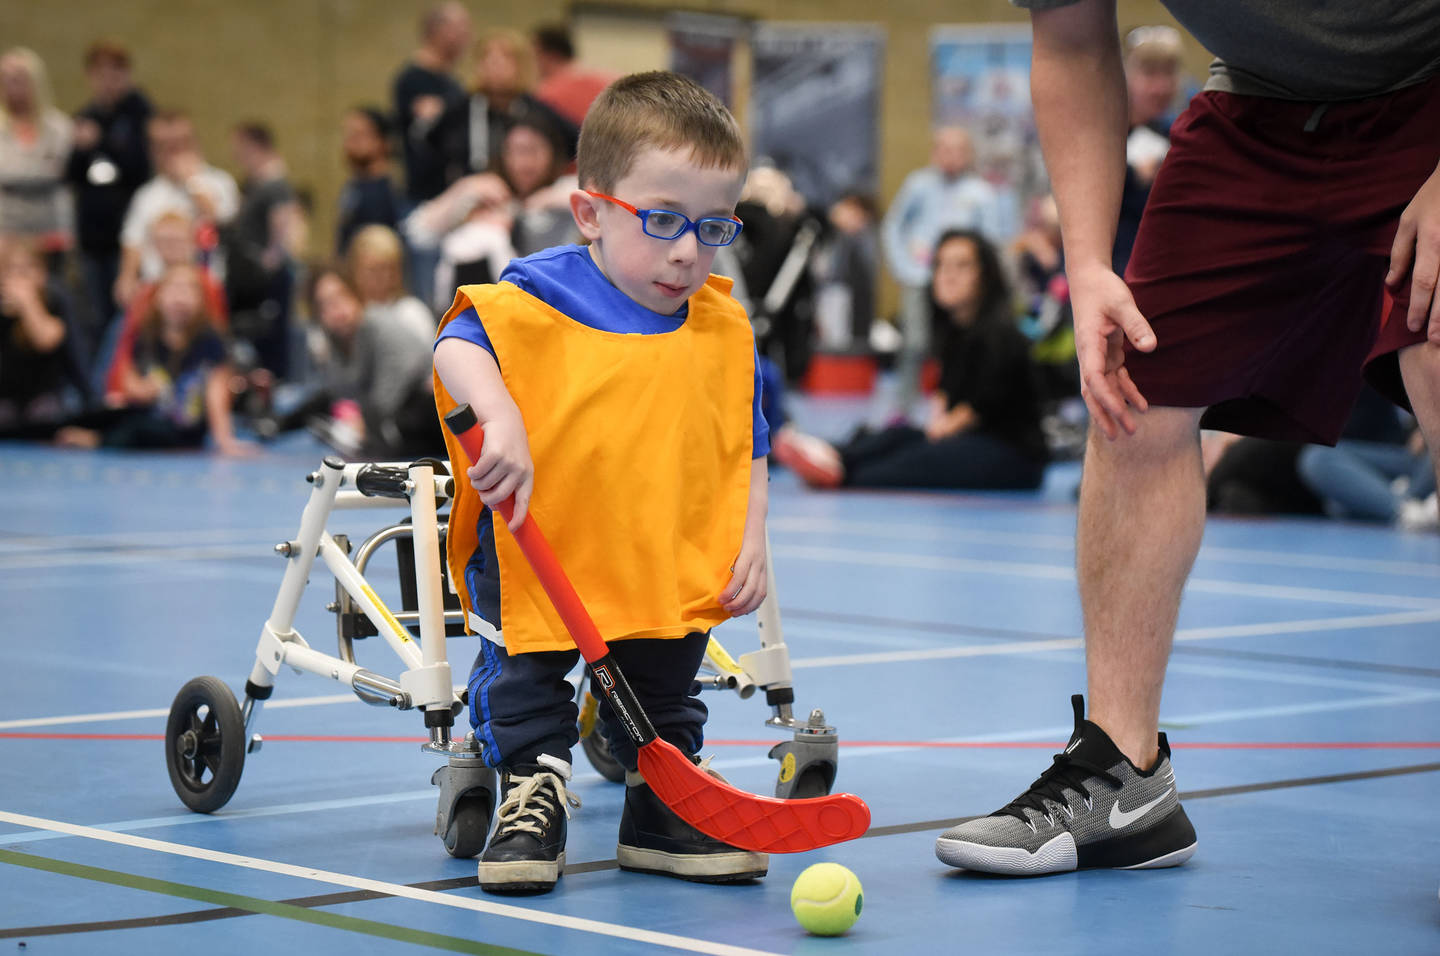 ung boy with dwarfism taking part in an indoor hockey game